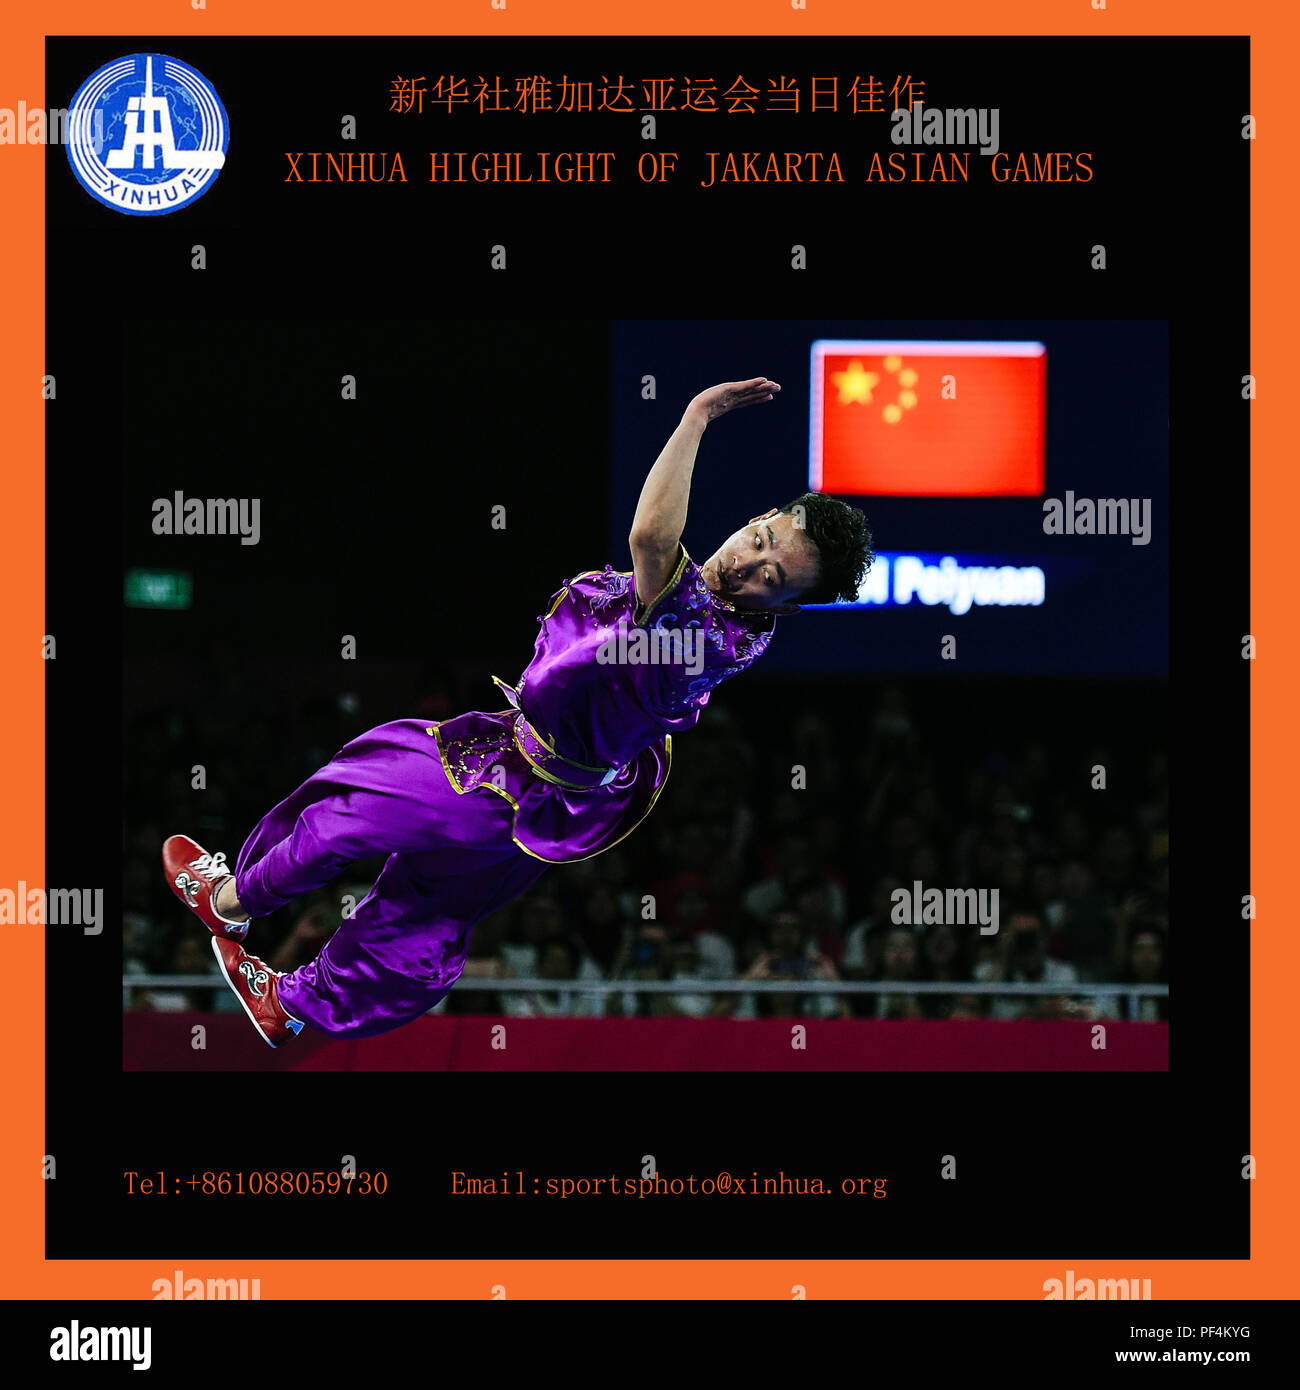 XINHUA HIGHLIGHT OF JAKARTA ASIAN GAMES TRANSMITTED ON Aug. 19, 2018. Sun Peiyuan of China competes during the Men's Wushu Changquan final at the 18th Asian Games in Jakarta, Indonesia on Aug. 19, 2018. (Xinhua/Li Xiang) Stock Photo